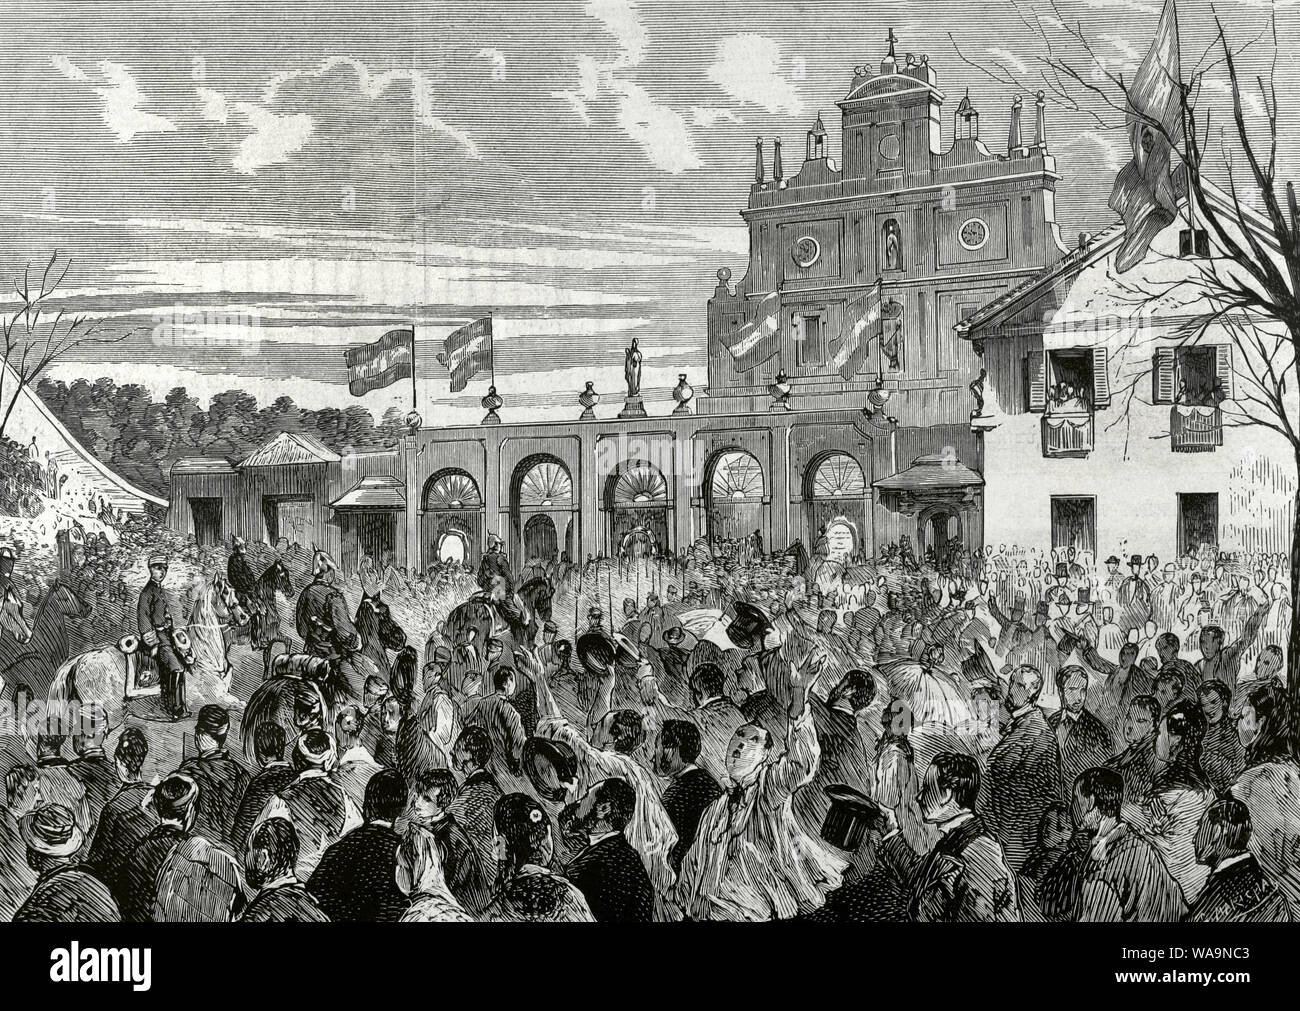 History of Spain. The Bourbon Restoration. Madrid. Arrival of the king Alfonso XII to the Basilica of Our Lady of Atocha, on March 20, 1876, to attend the Te Deum that was celebrated on thanksgiving, after the end of the Third Carlist War. That same day he entered the capital with the troops. Engraving. La Ilustracion Española y Americana. March 30, 1876. Stock Photo